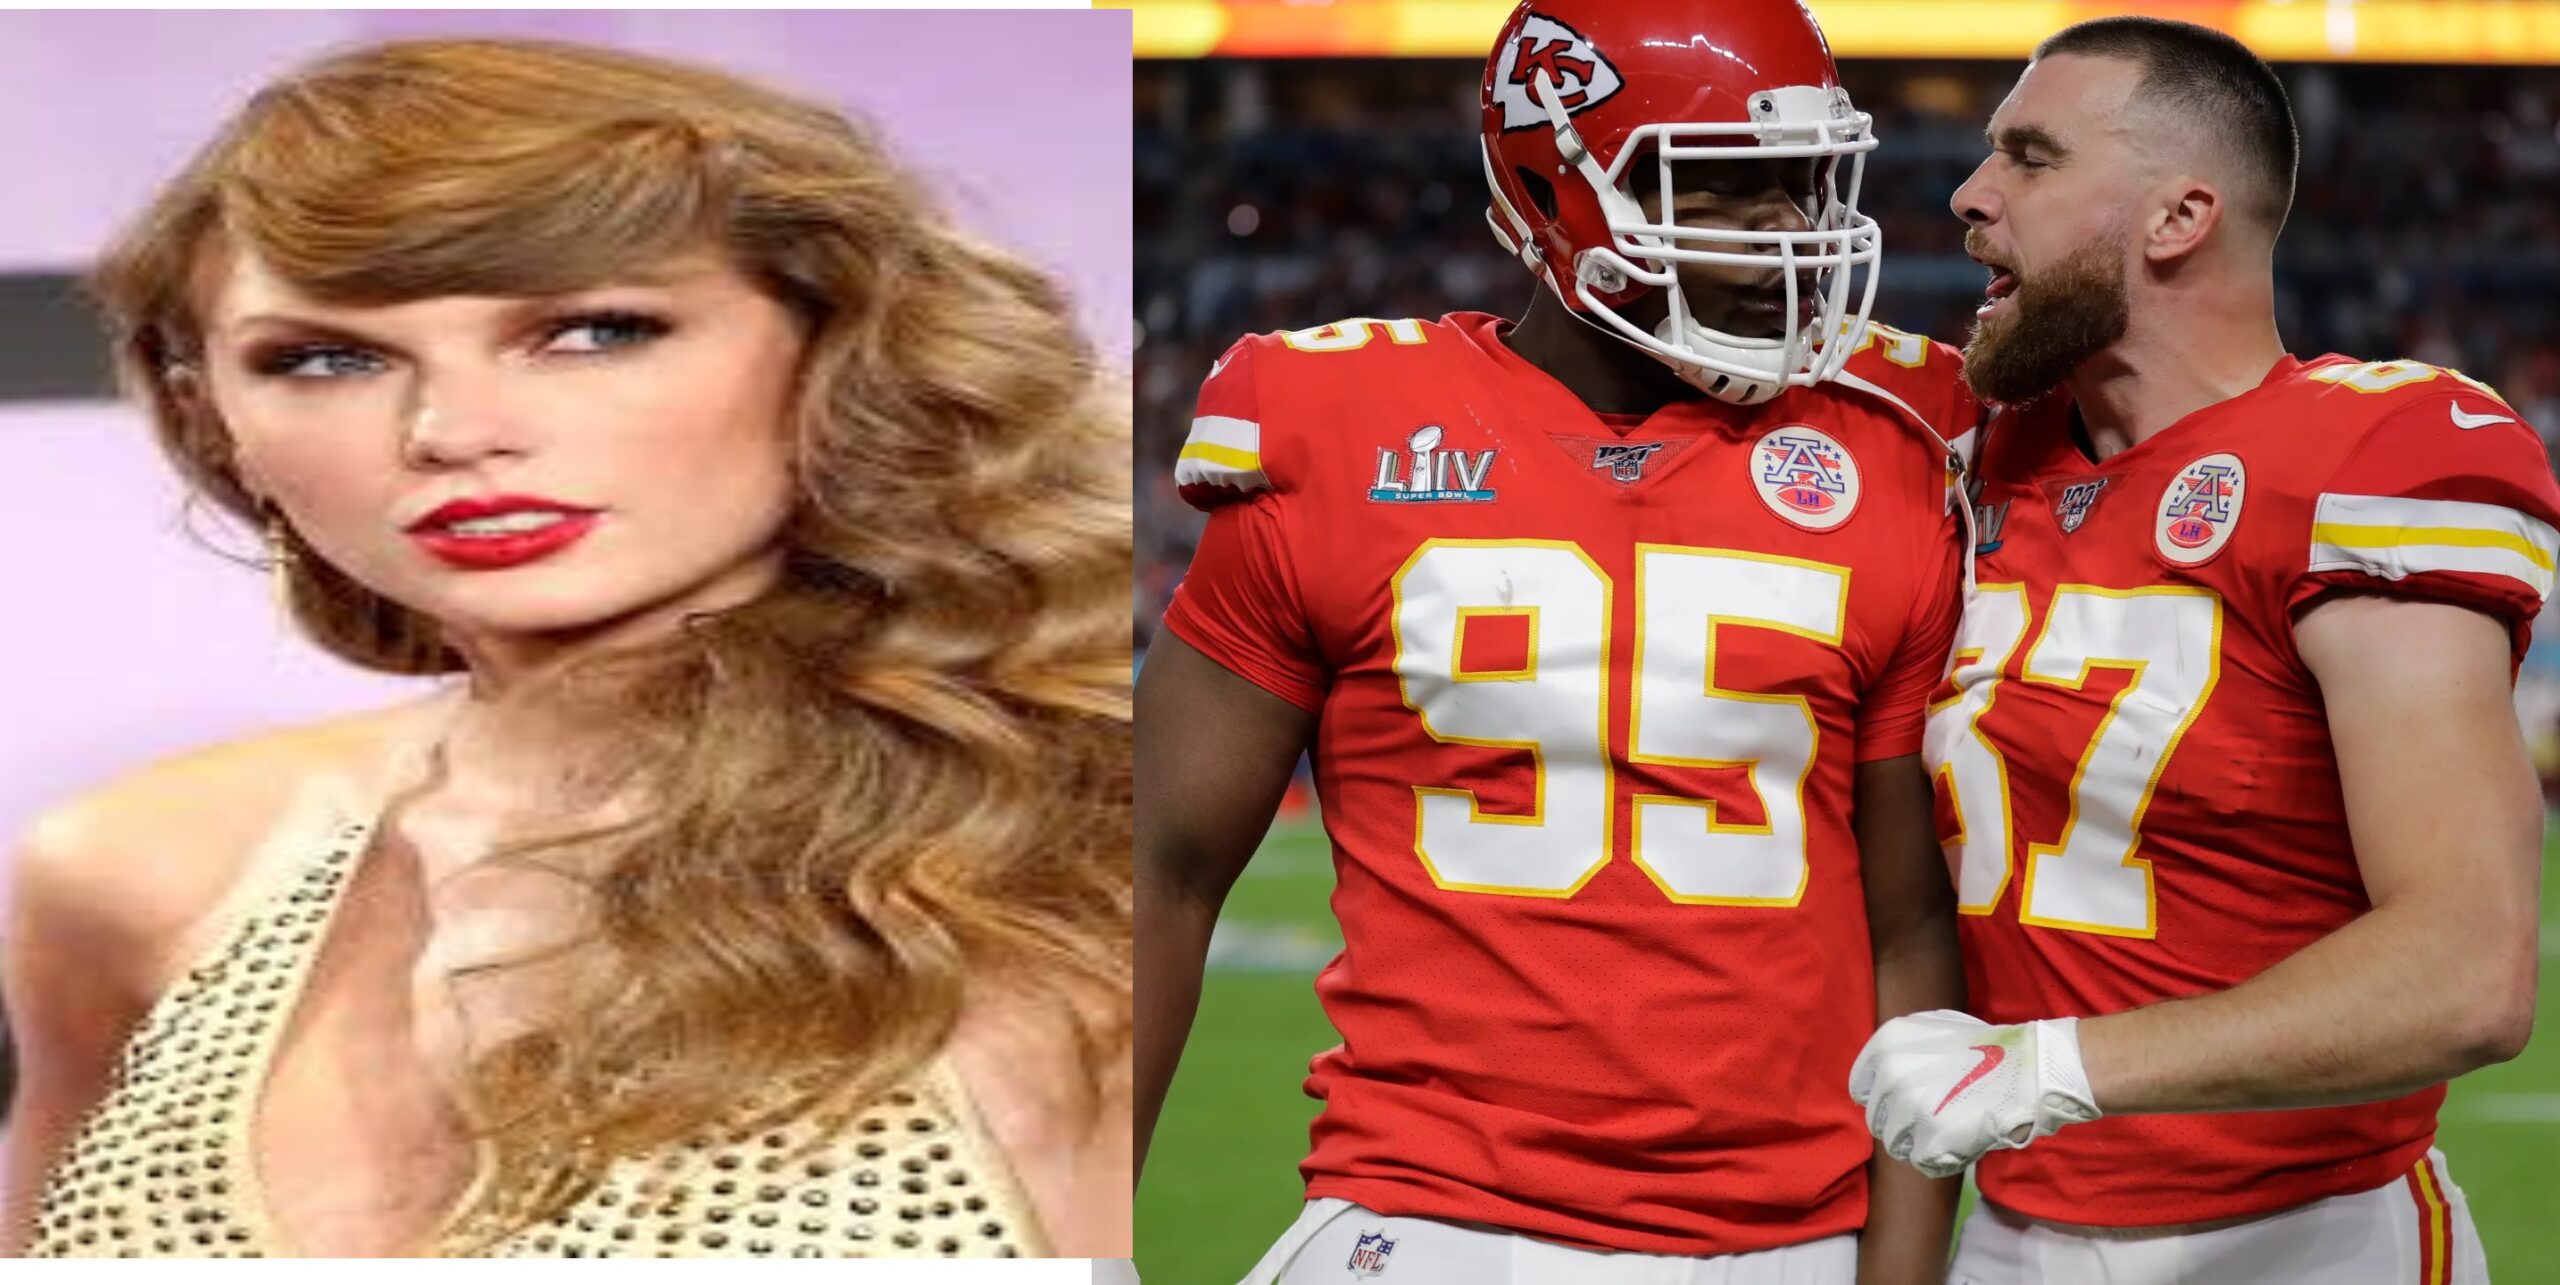 "Taylor Swift surprised everyone when she said she broke up with Travis Kelce because she thought Chris Jones was a better match. Then, she quickly announced that she's now engaged to Chris Jones."